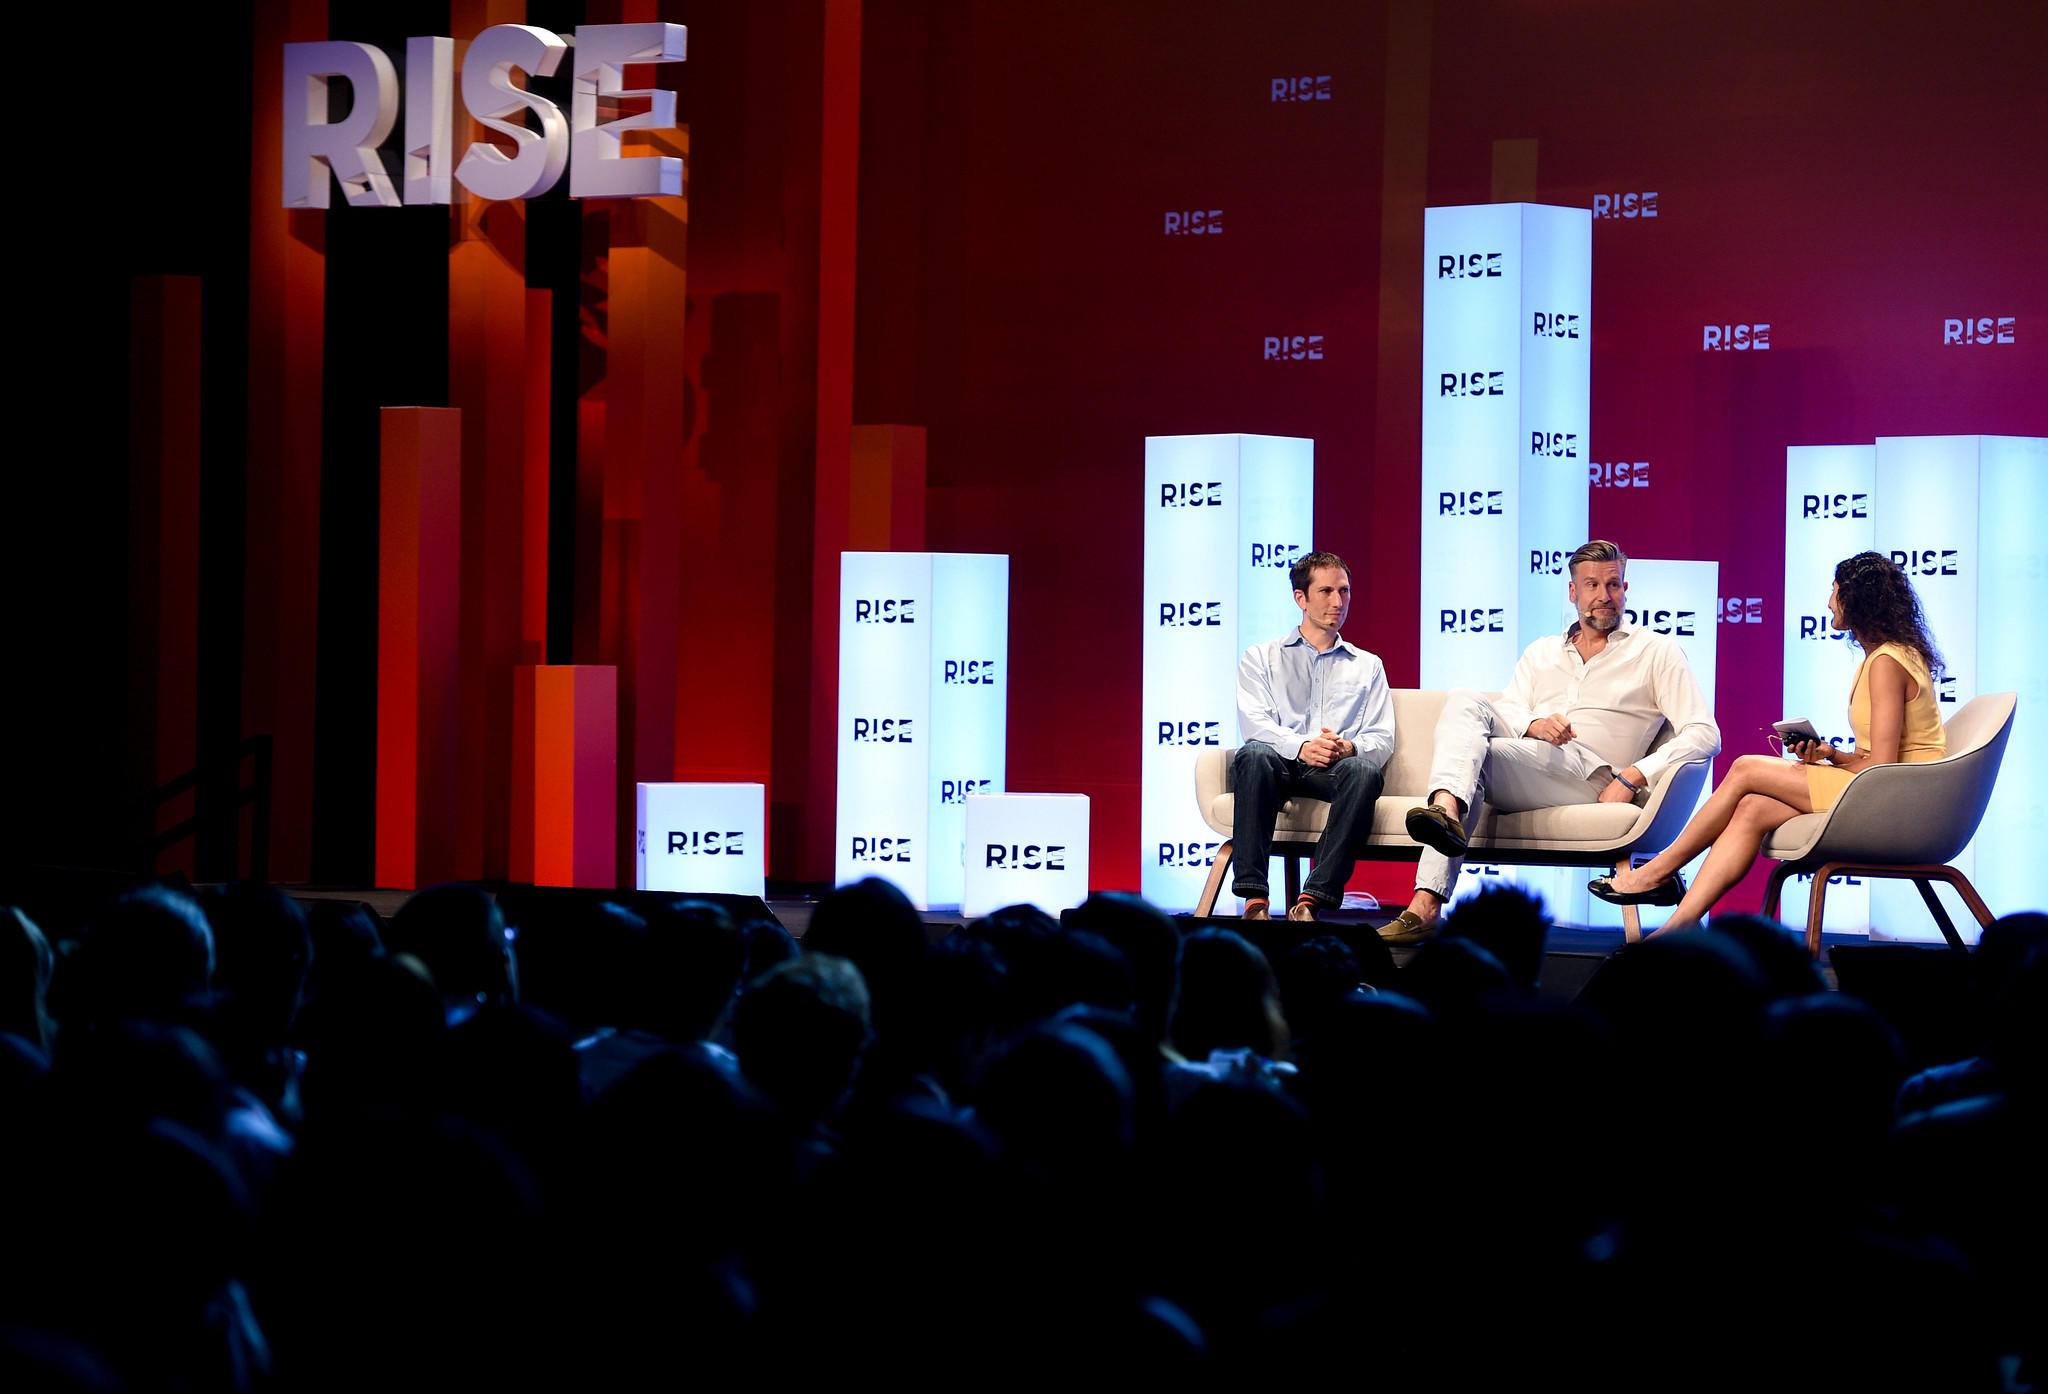 RISE tech conference to move to Kuala Lumpur in 2022 with MDEC partnership